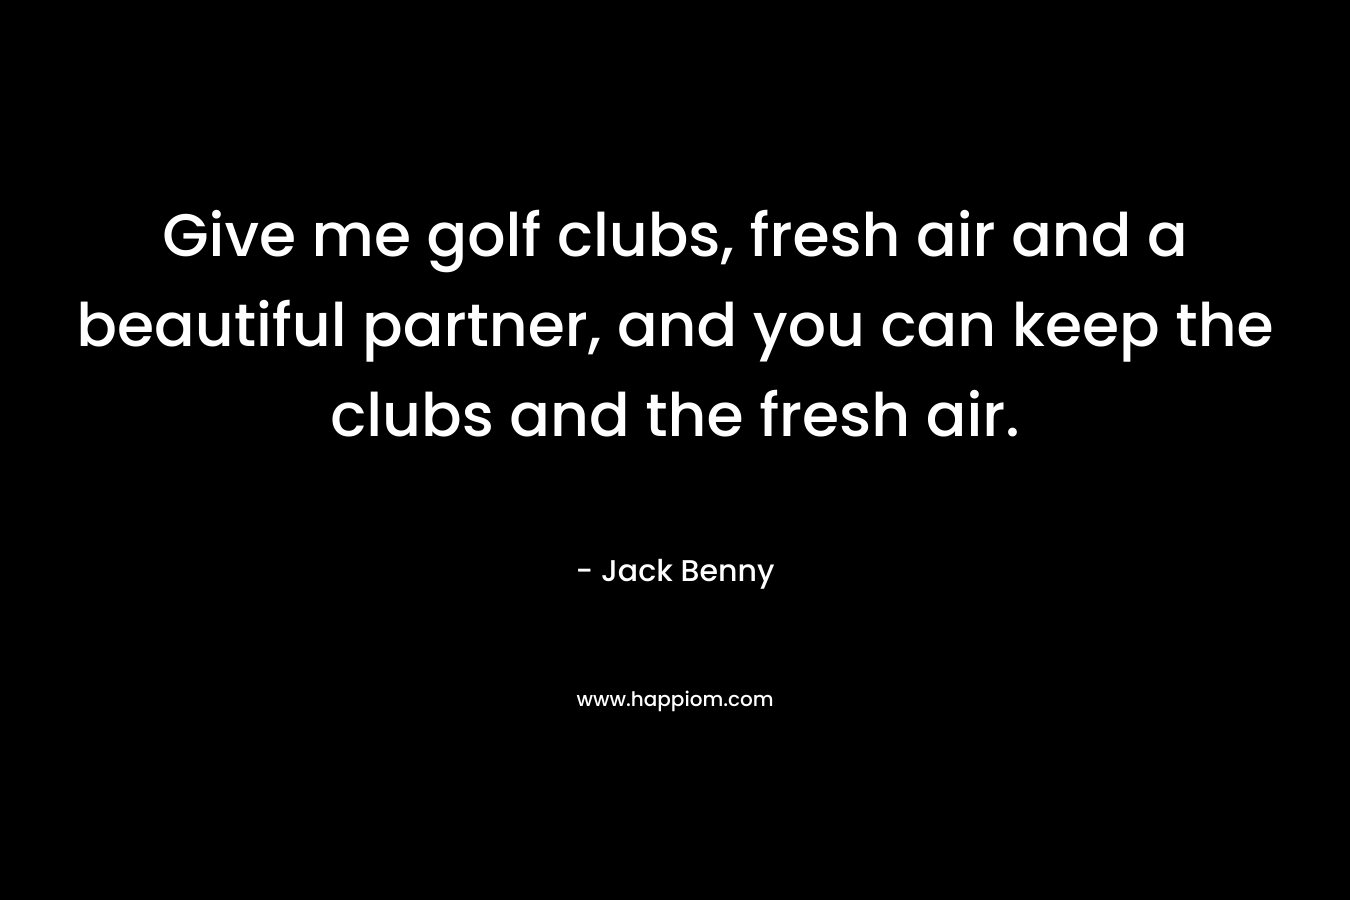 Give me golf clubs, fresh air and a beautiful partner, and you can keep the clubs and the fresh air.